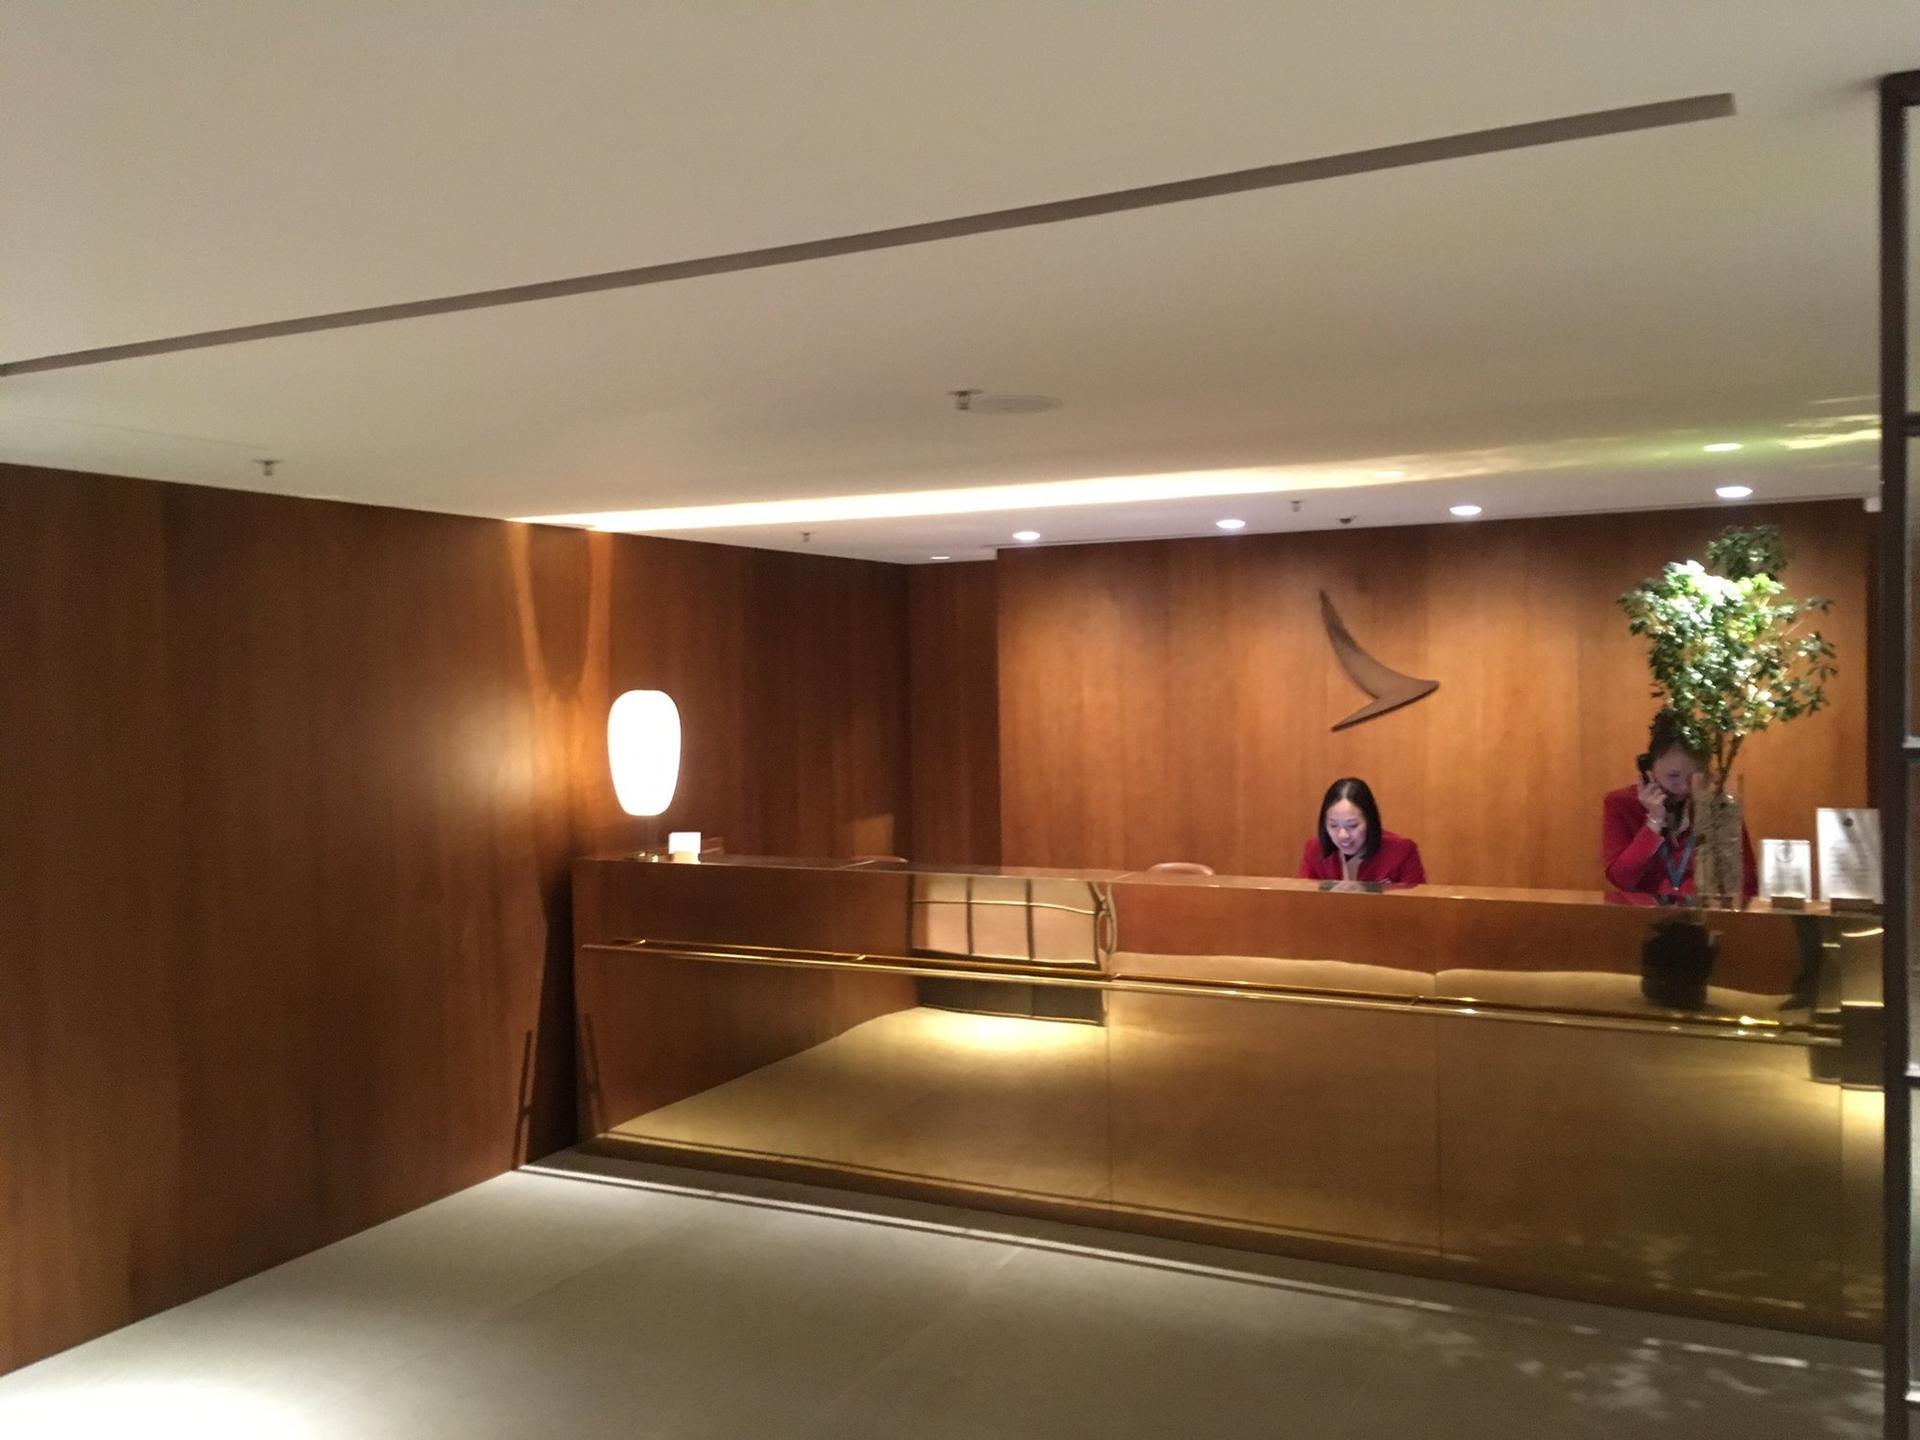 Cathay Pacific The Pier First Class Lounge image 77 of 100